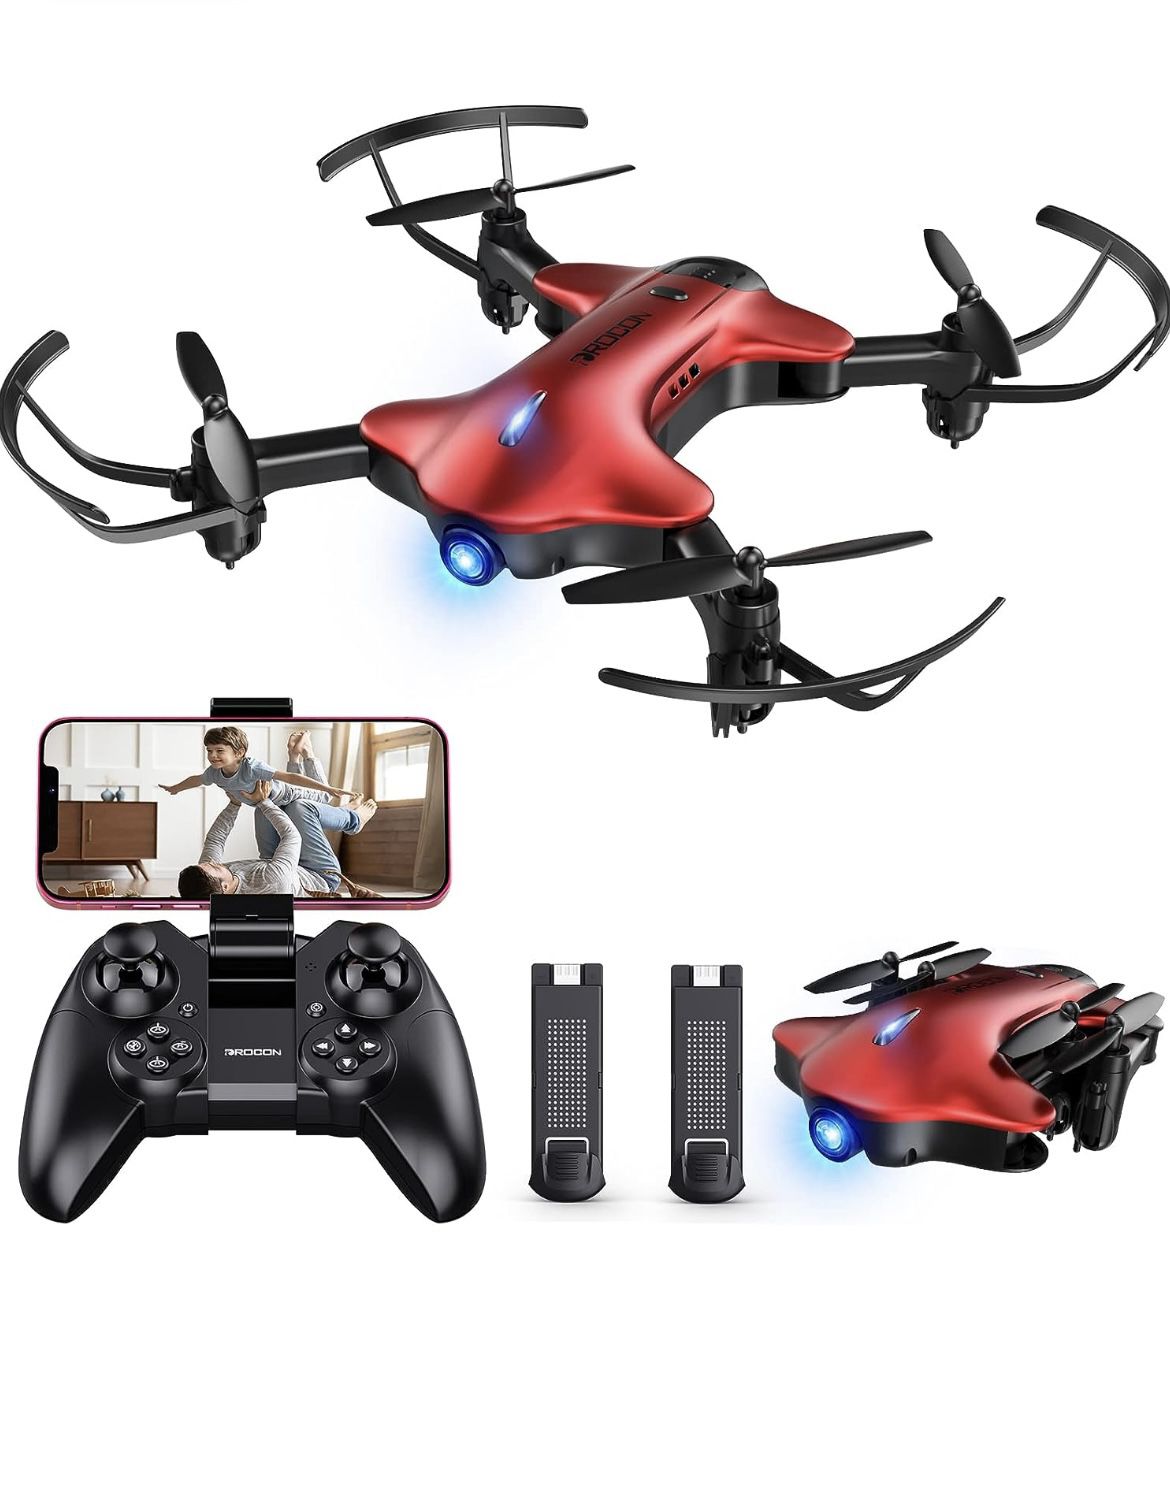 Brand new Air Dancing Drone for Kids, Spacekey FPV Wi-Fi Drone with Camera 1080P FHD, Real-time Video Feed, Great Drone for Beginners, Quadcopter Dron